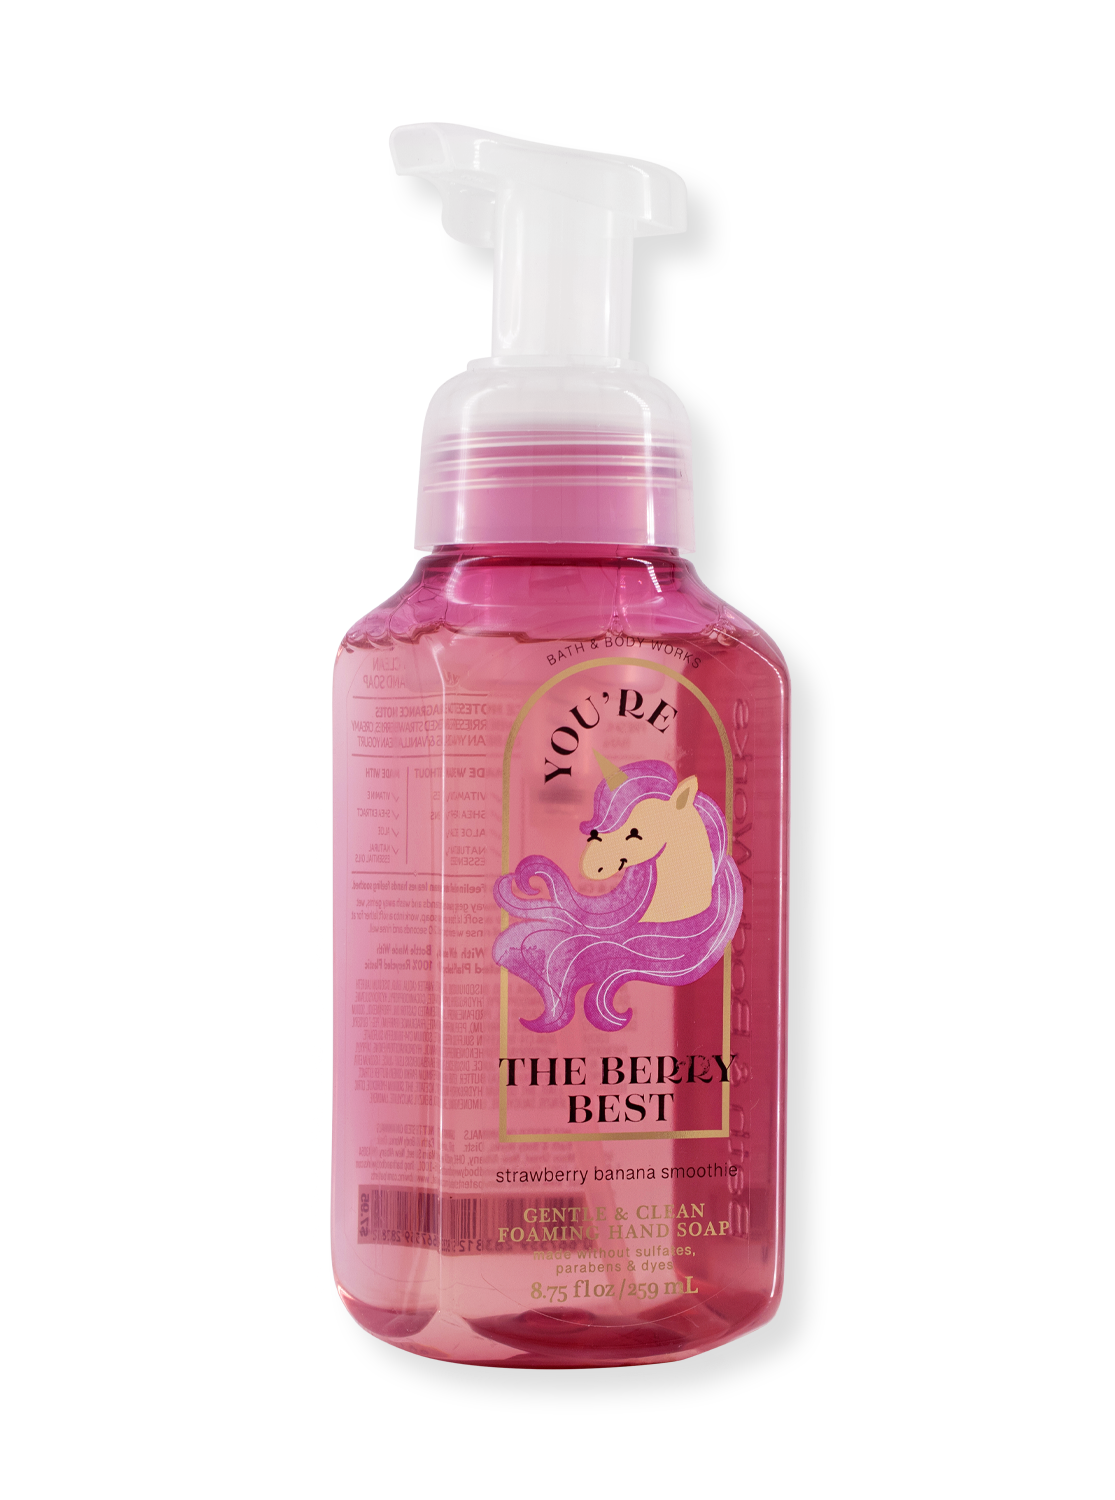 Foam soap - You´re the Berry Best - Strawberry Banana Smoothie - 259ml